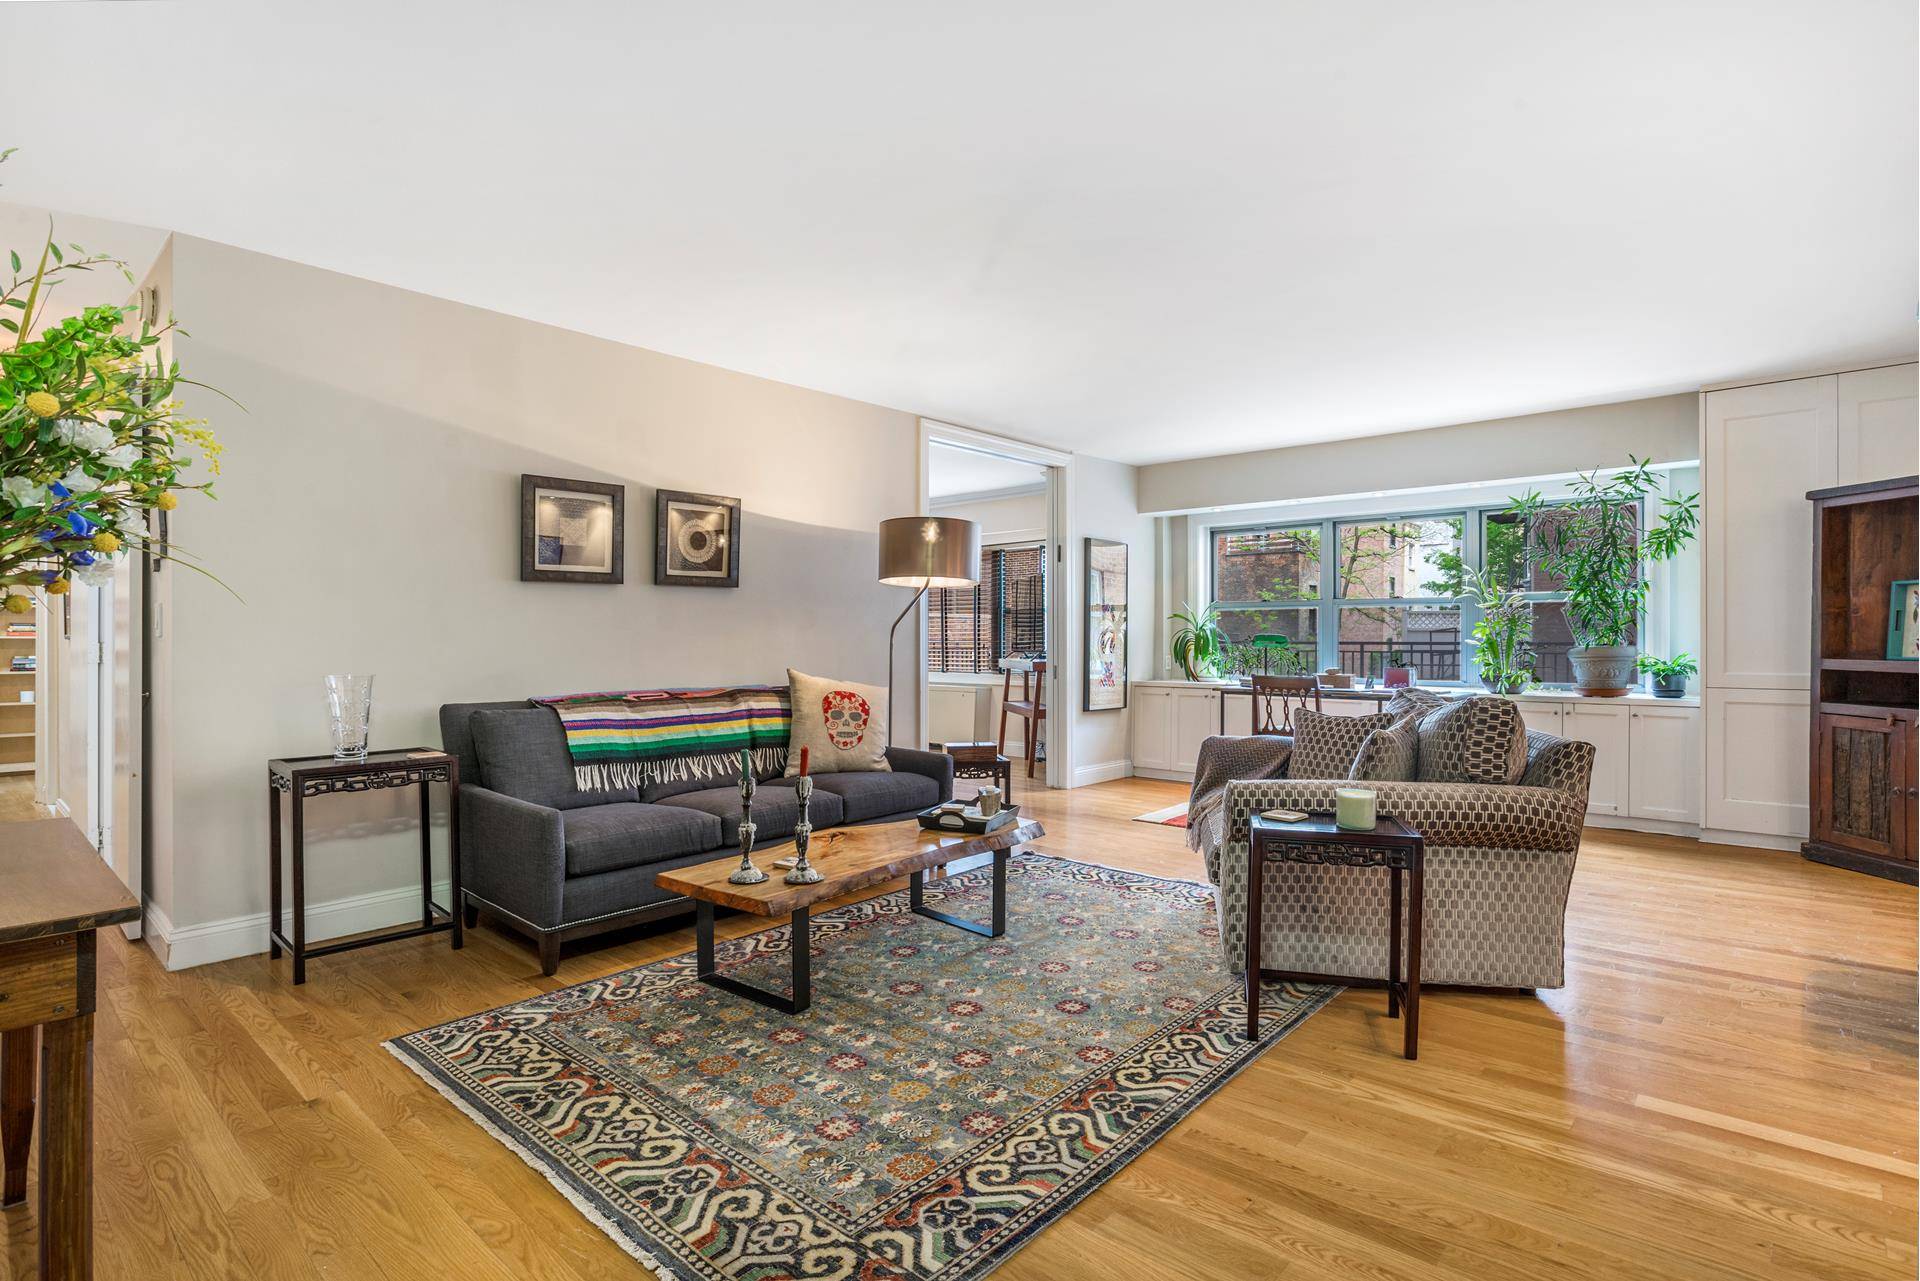 This elegant and very spacious two bedroom, one and half bathroom home is located on the corner of Madison Avenue and 65th Street, one of the most coveted blocks on ...